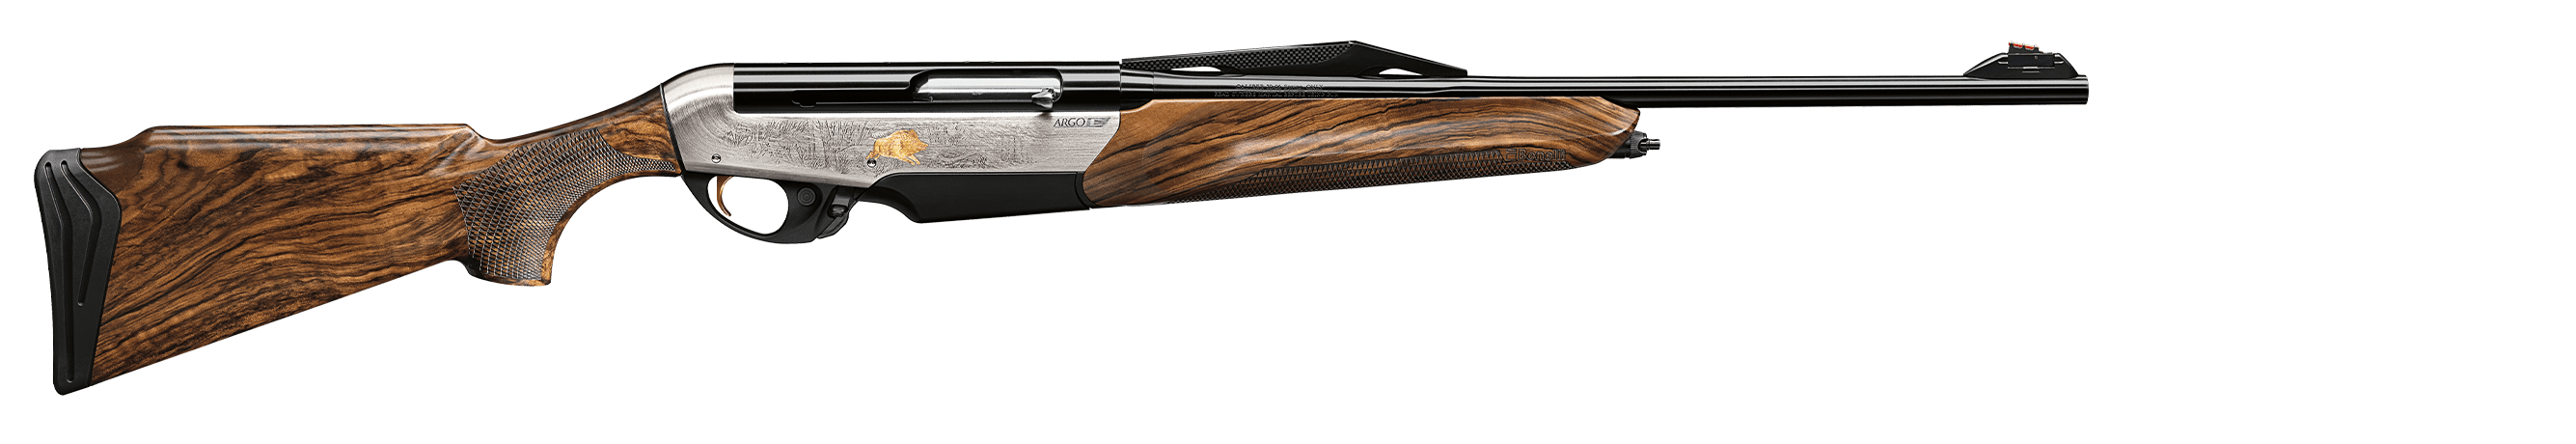 benelli-argo-e-limited-edition.png